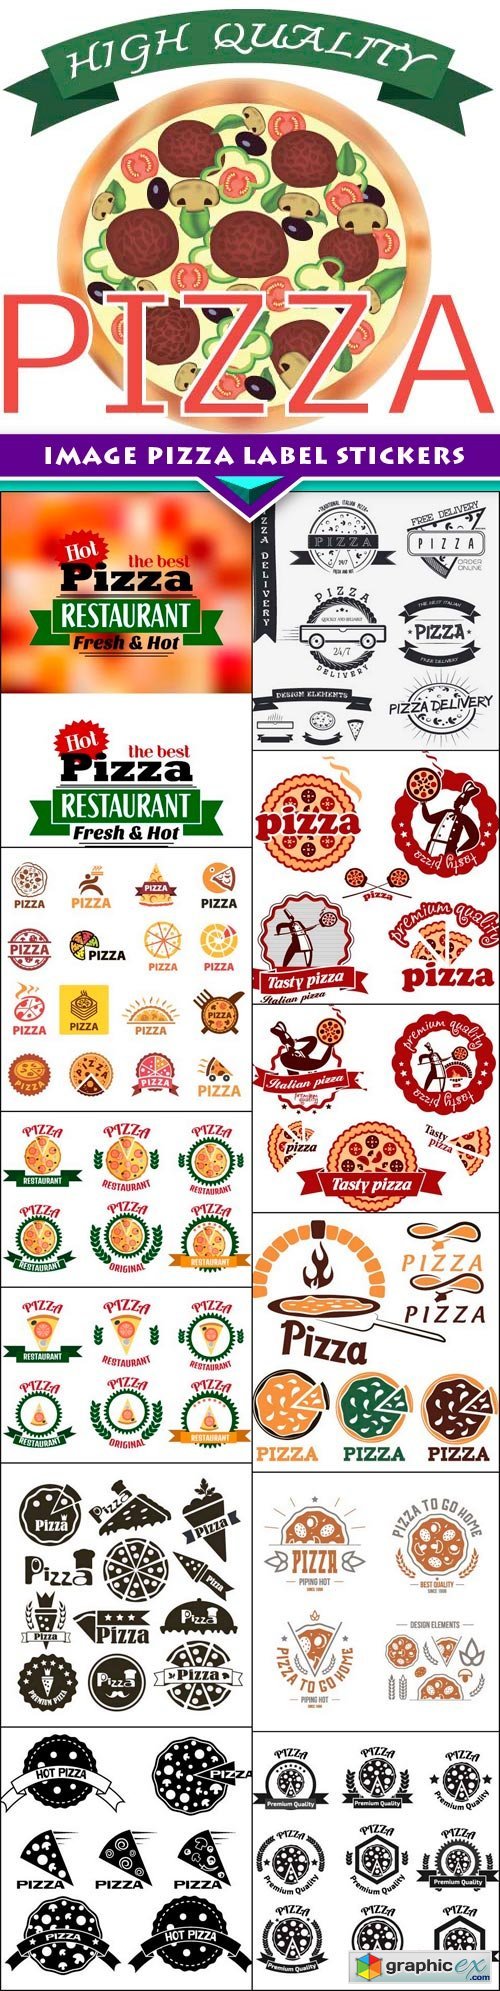 Image Pizza label stickers 13x EPS